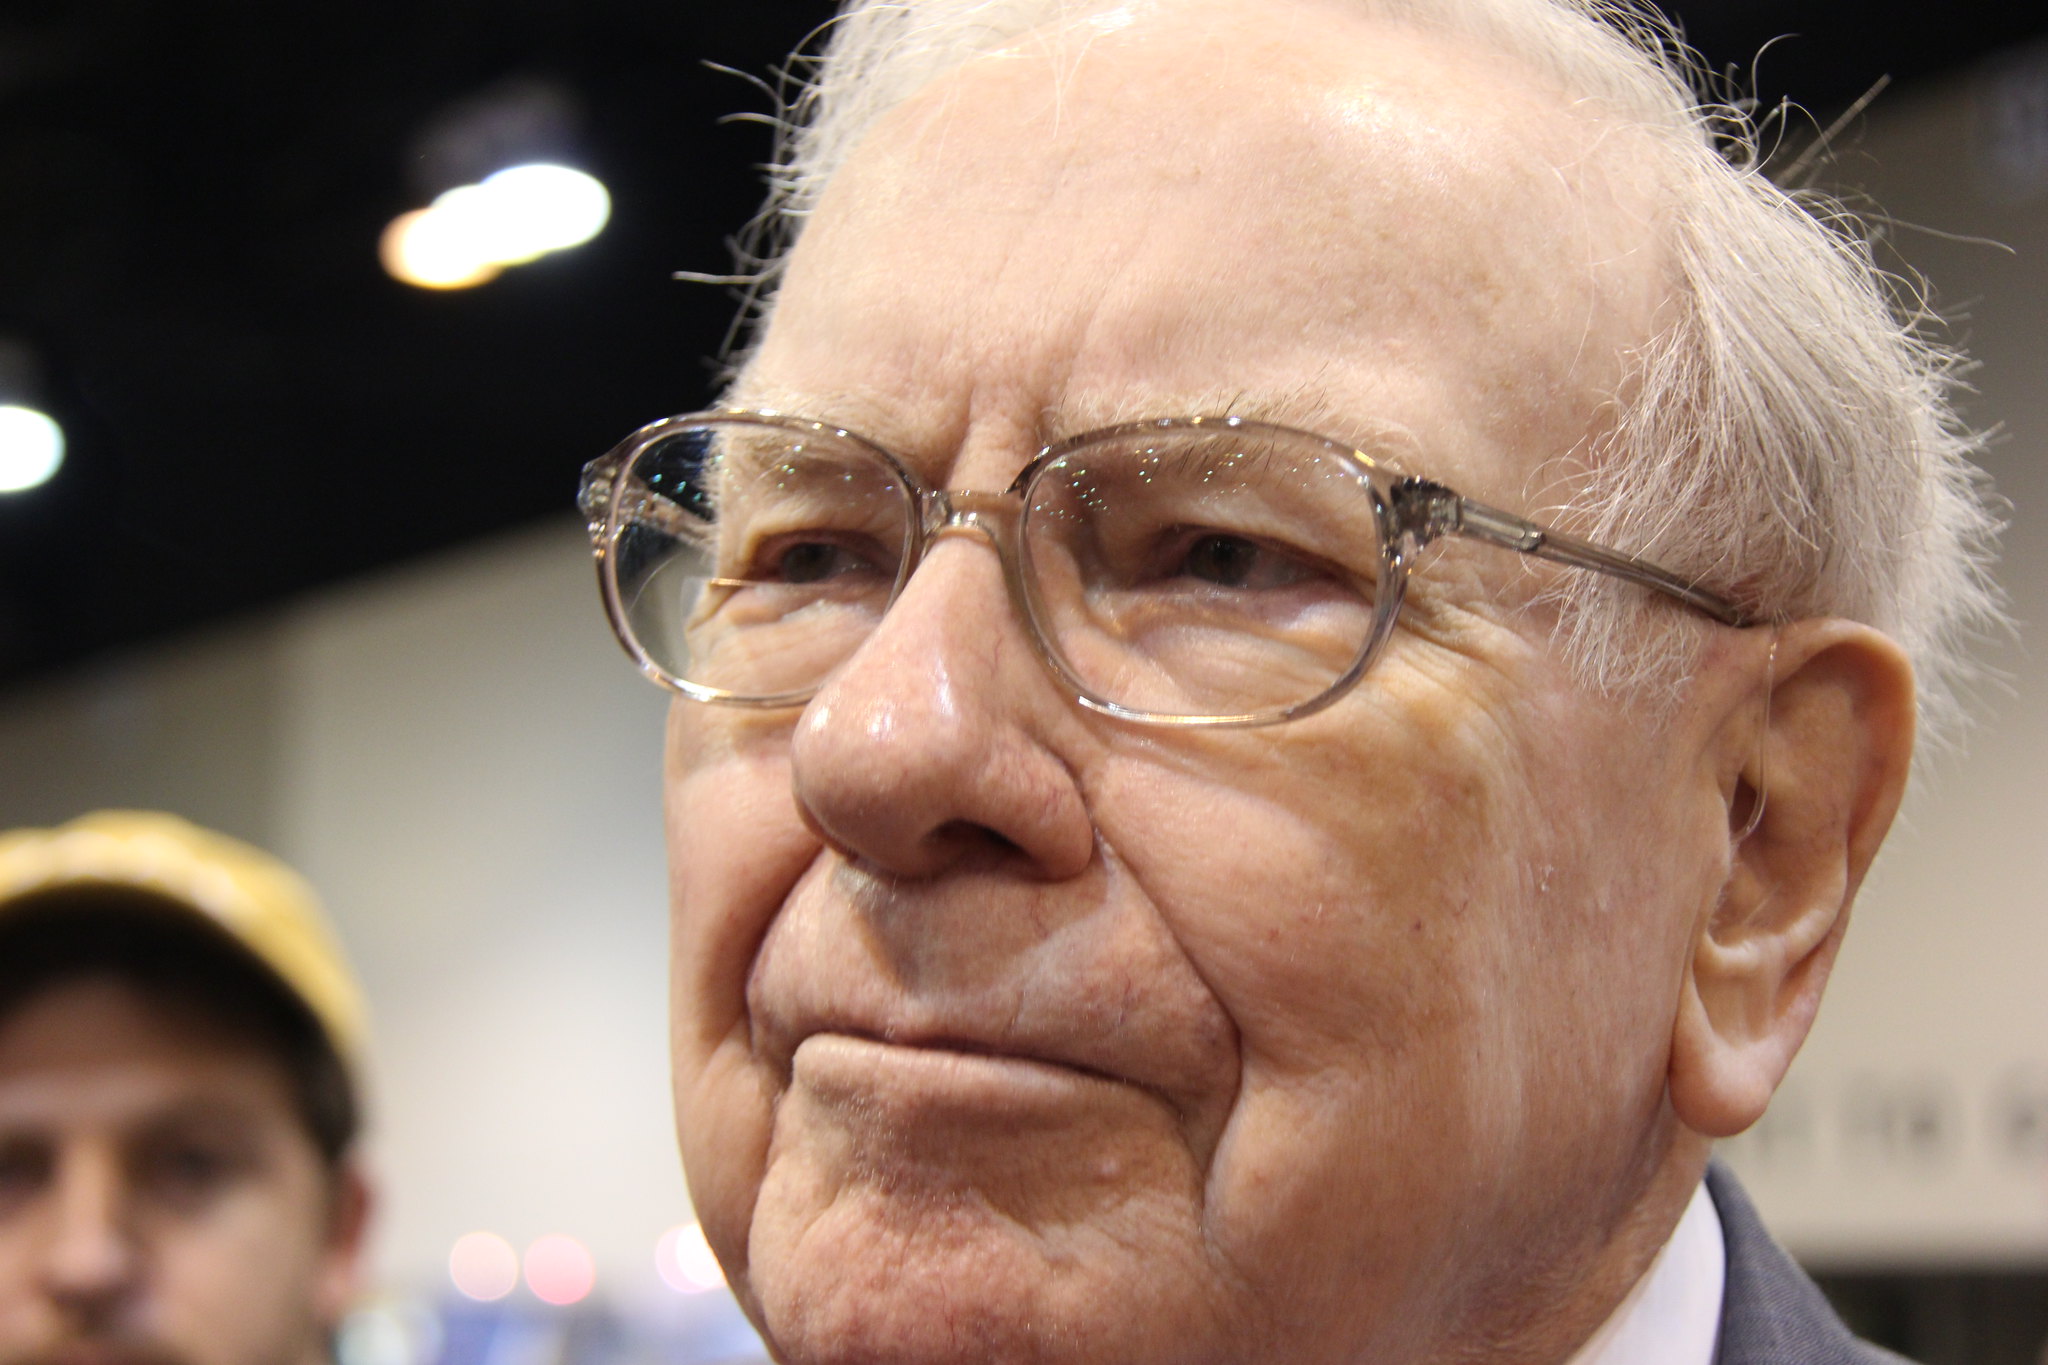 Here’s the 1 Stock Warren Buffett Thinks Should Outperform the S&P 500 Without as Much Downside